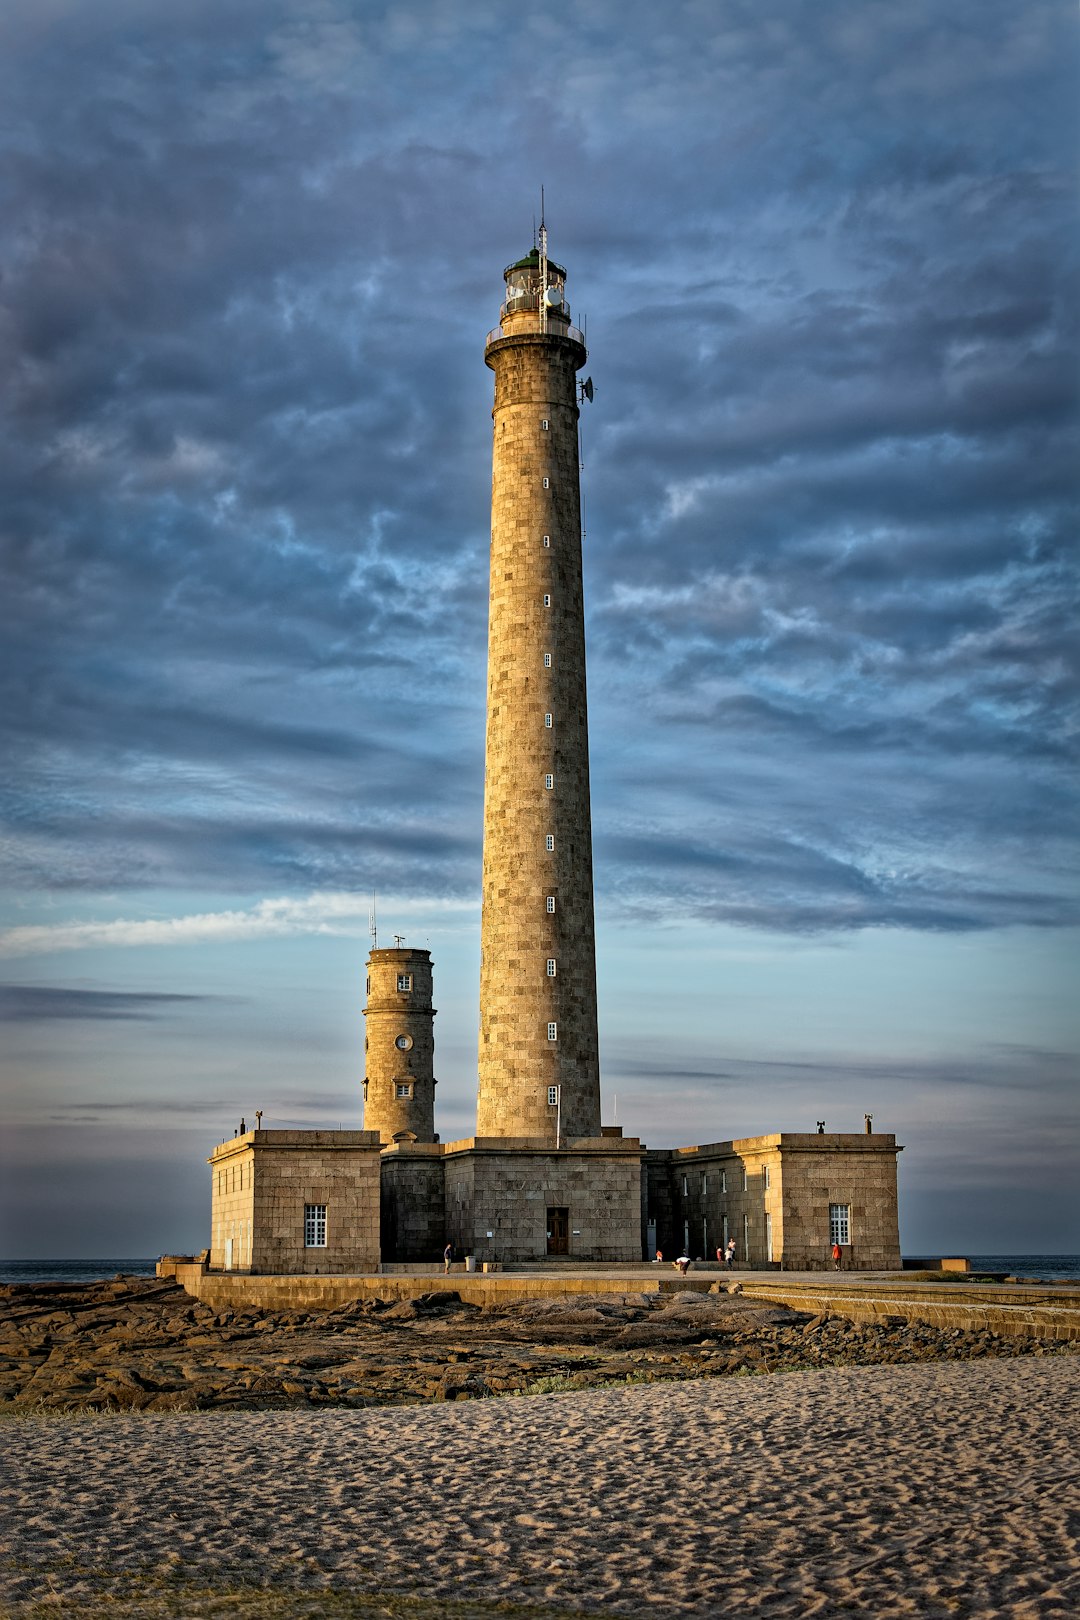 Travel Tips and Stories of Gatteville-le-Phare in France